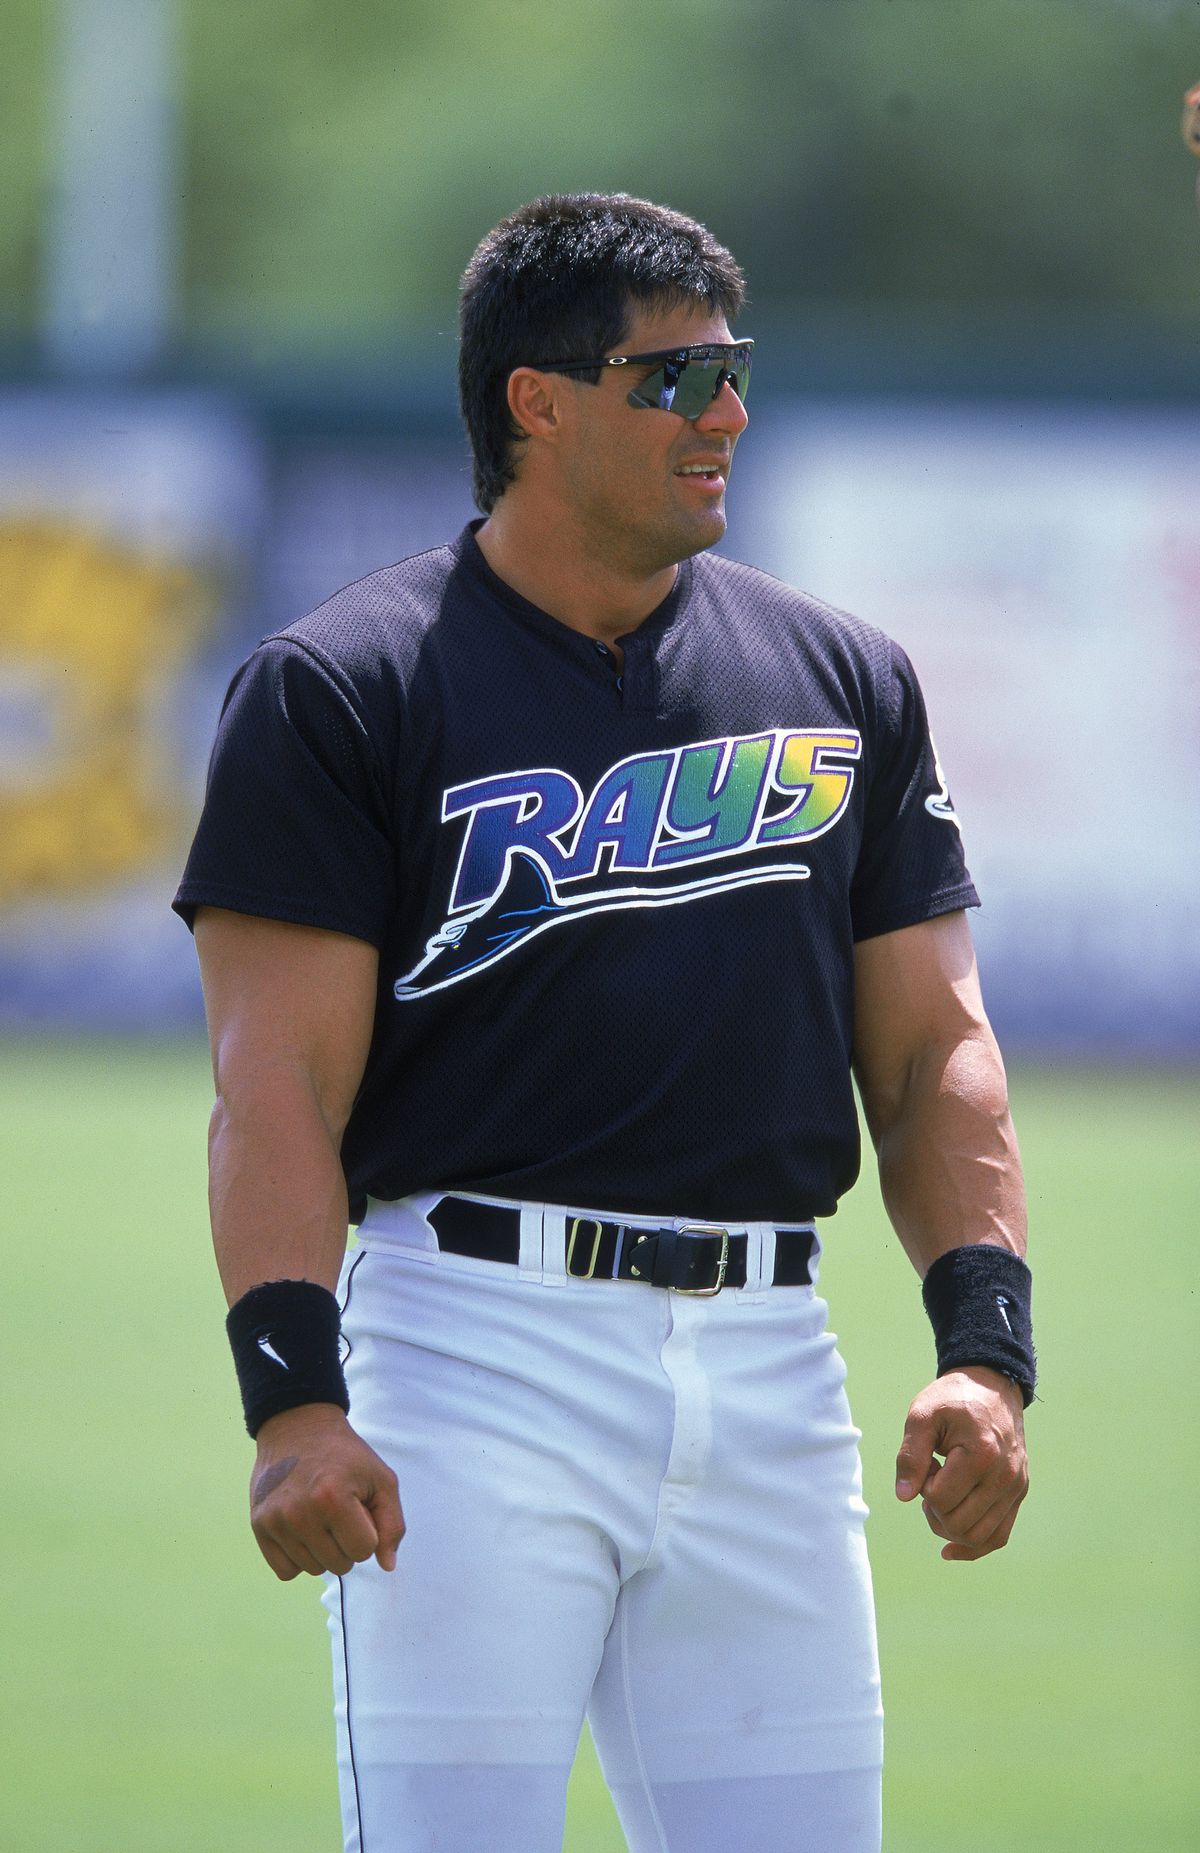 Jose Canseco #33